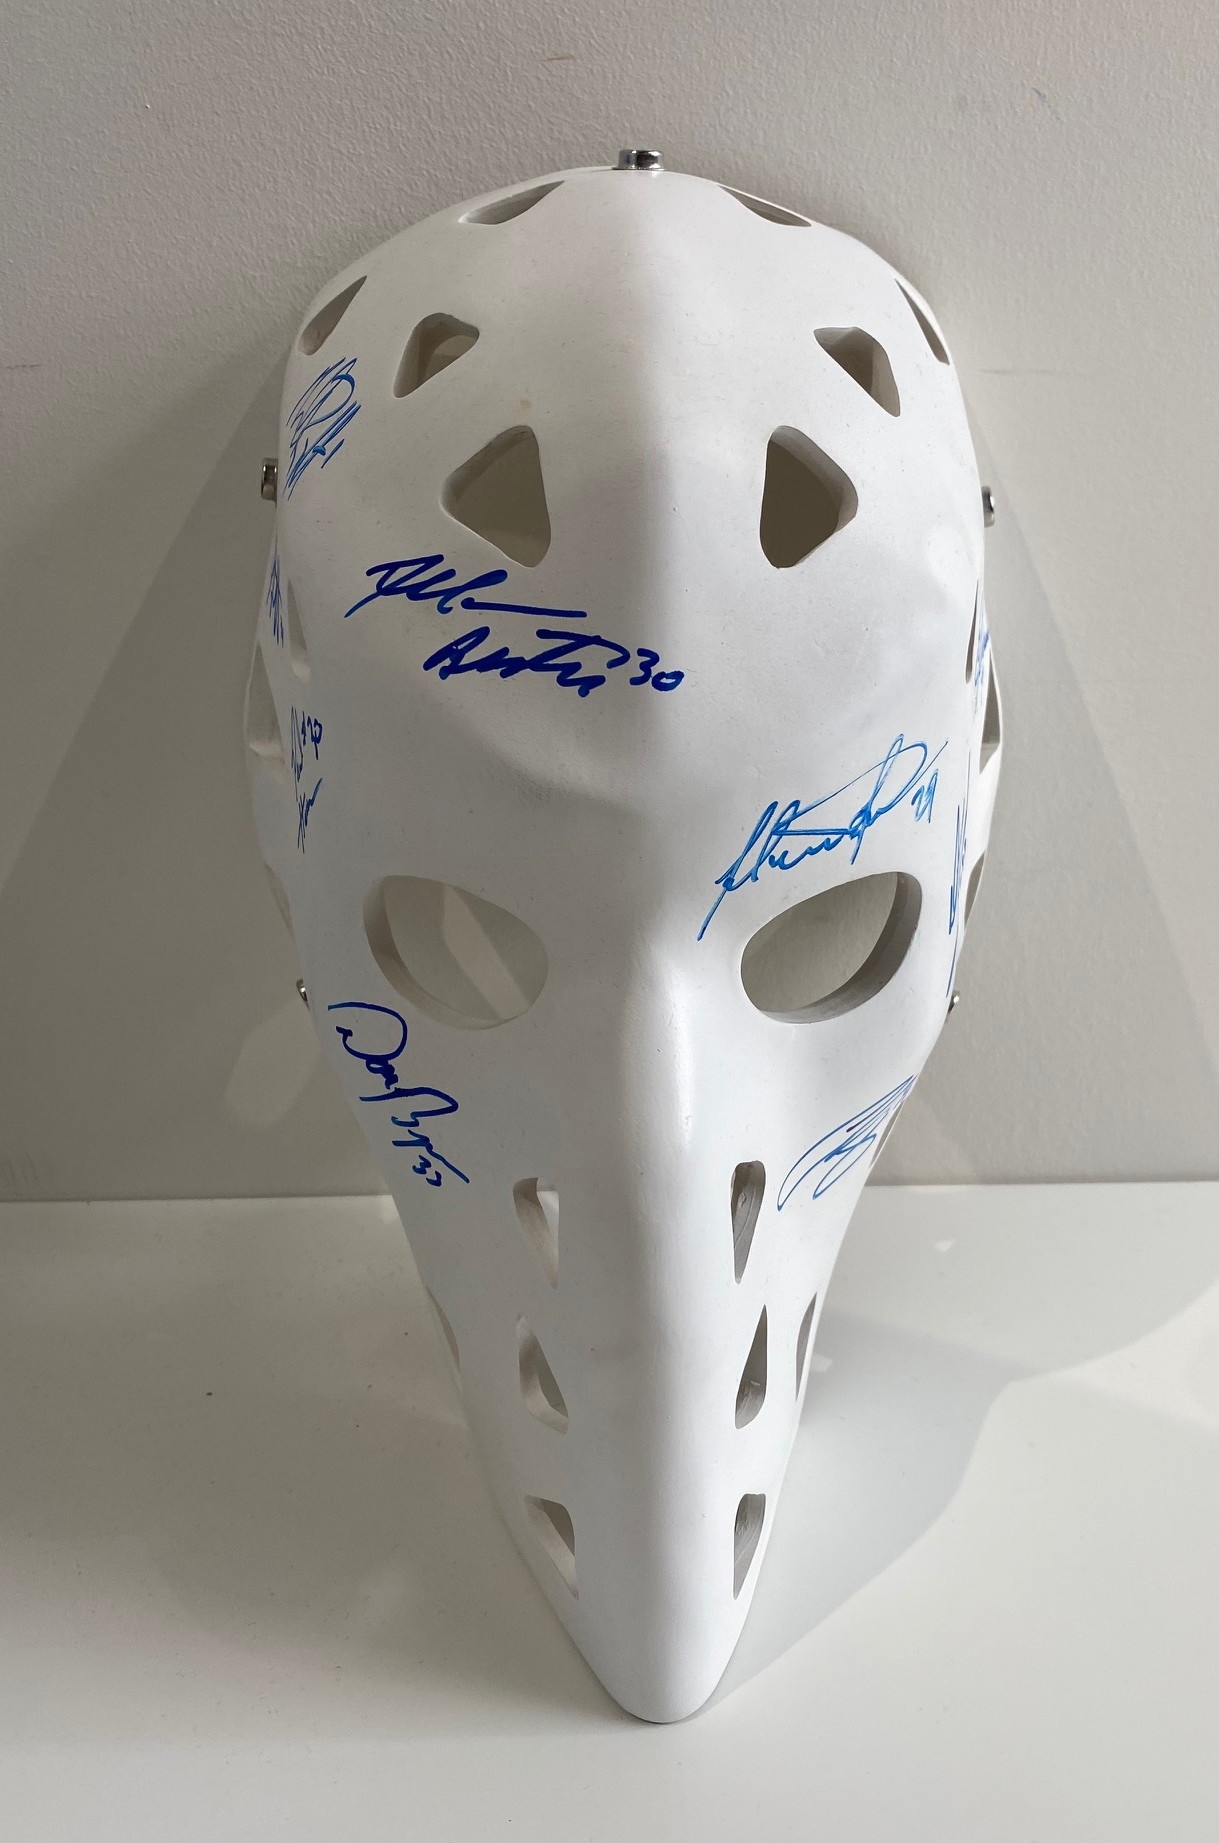 Vintage Mikula Mask Autographed by 9 Former Maple Leafs Goalies